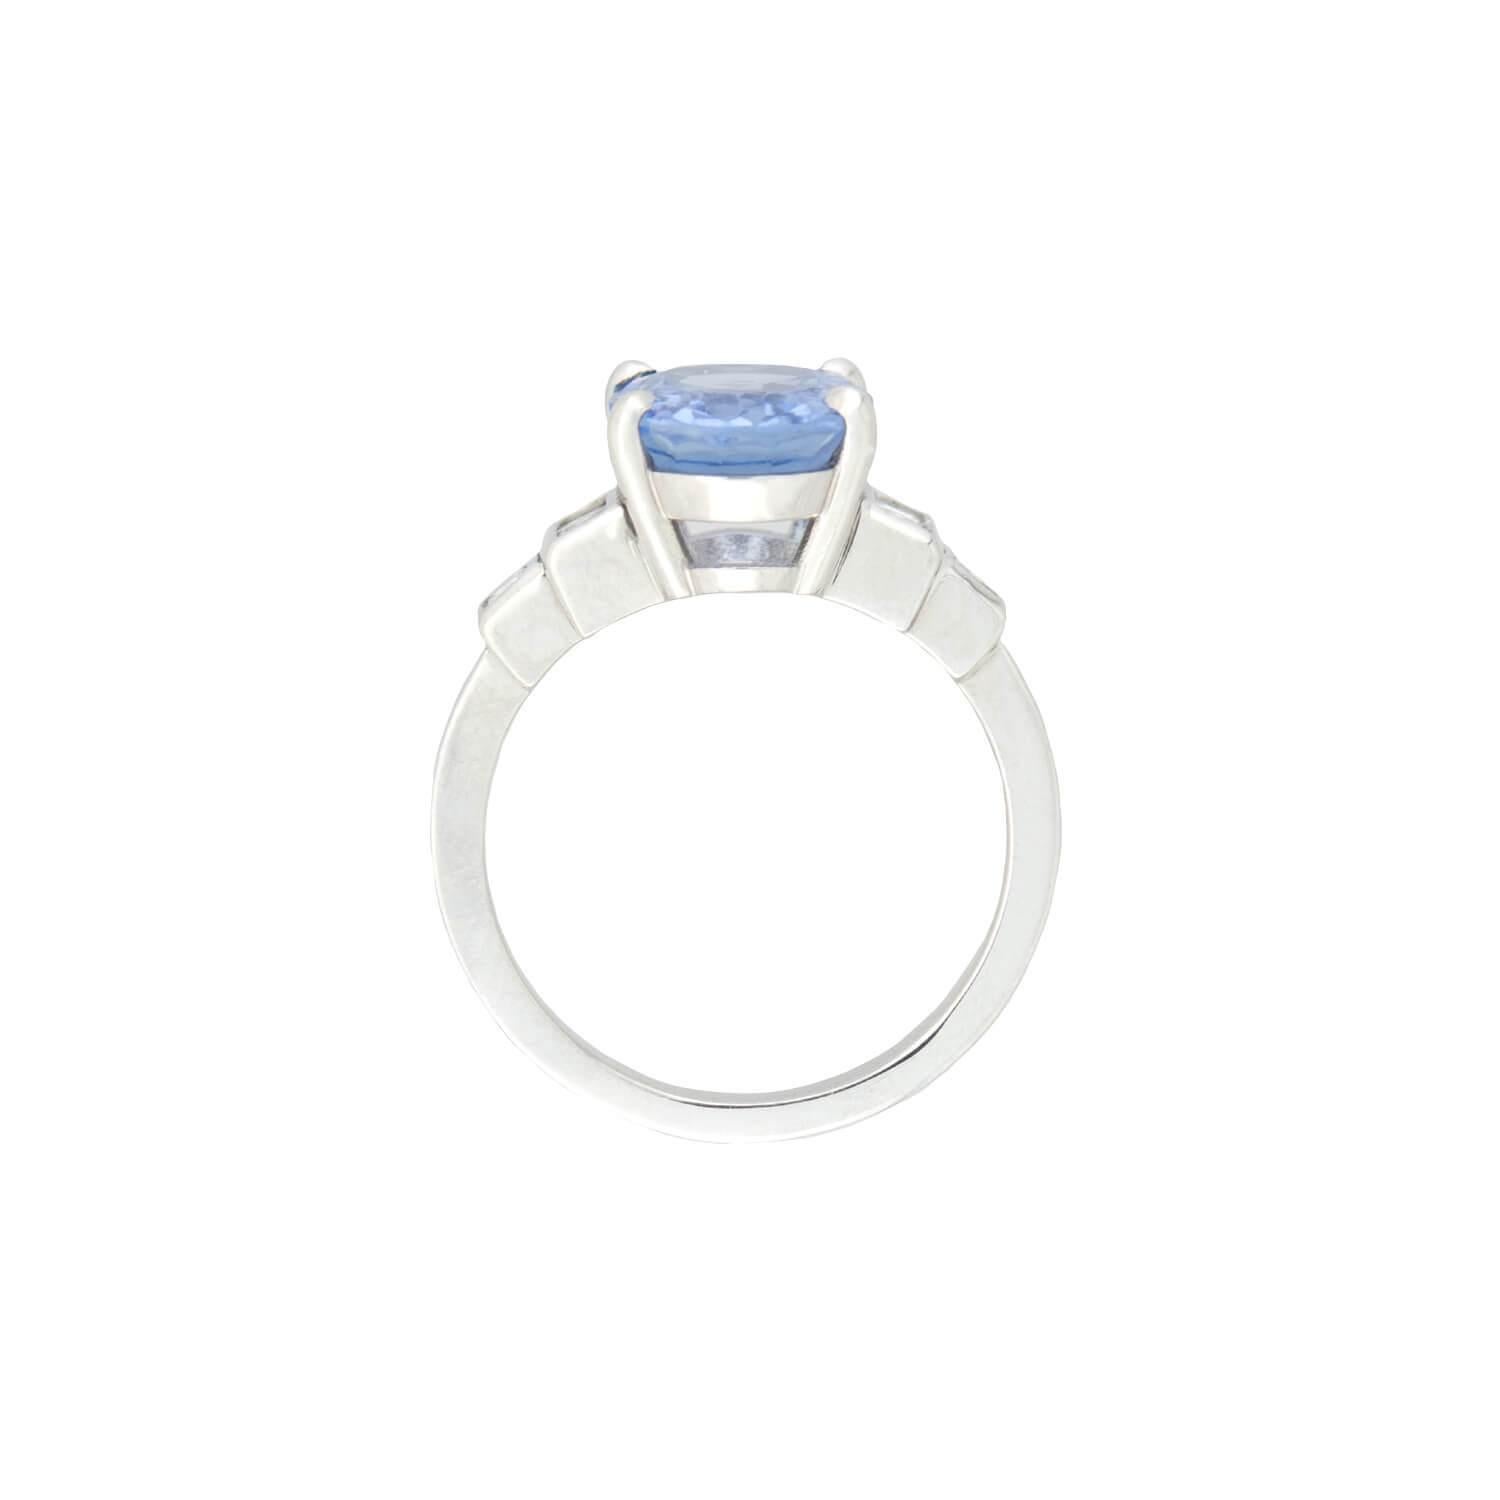 Crafted in platinum, this fantastic piece holds a stunning natural sapphire at the center, framed by sparkling diamonds at either shoulder. The Ceylon (Sri Lankan) sapphire has an exact weight of 3.70ct, and is beautifully faceted into a Modified